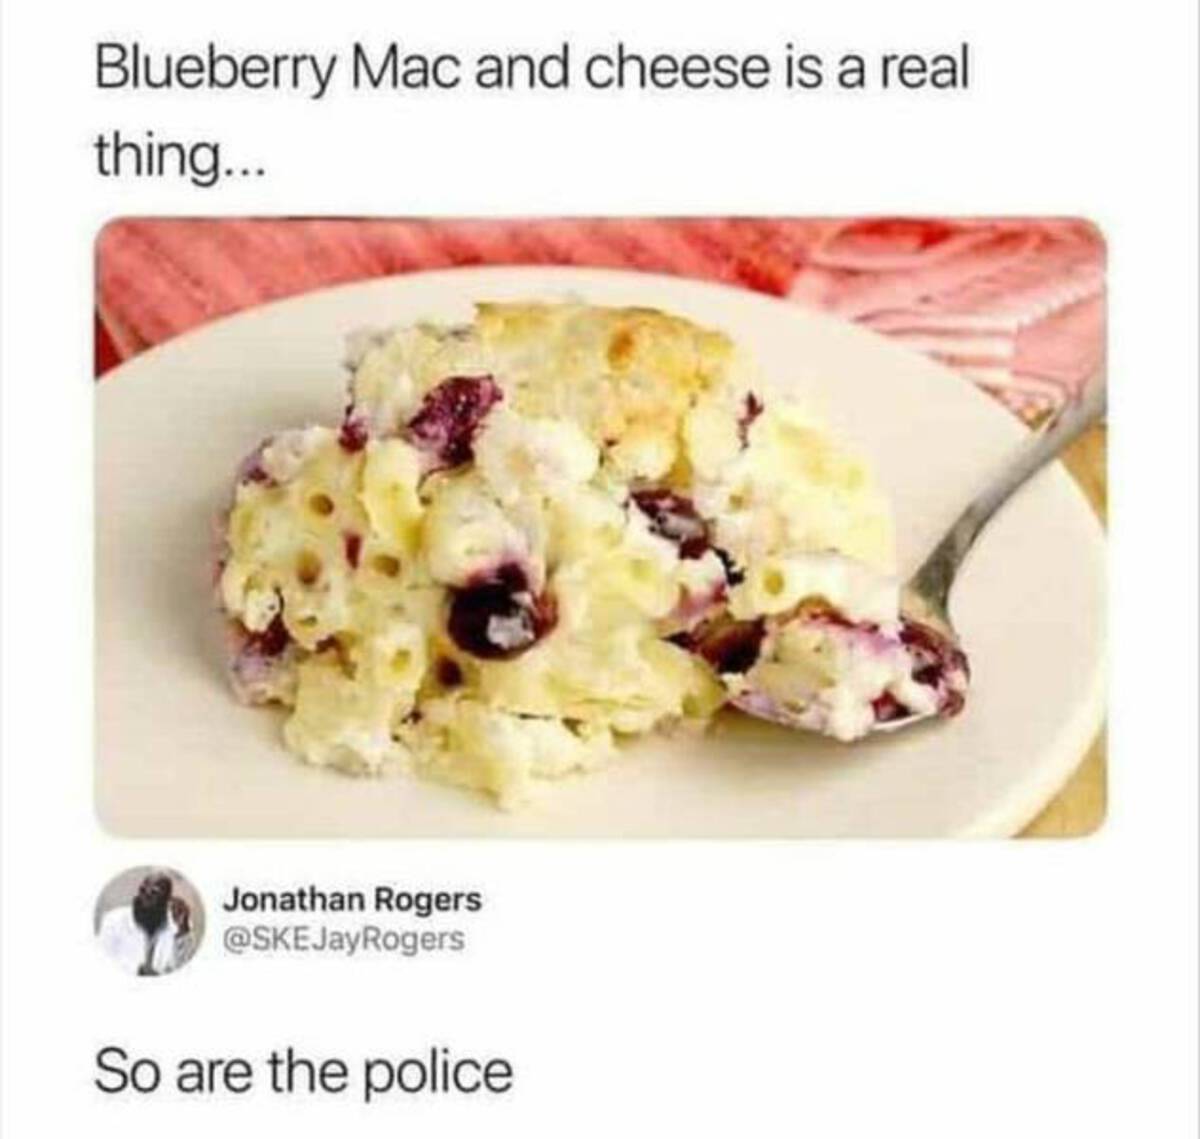 mac and cheese meme 2023 - Blueberry Mac and cheese is a real thing... Jonathan Rogers So are the police